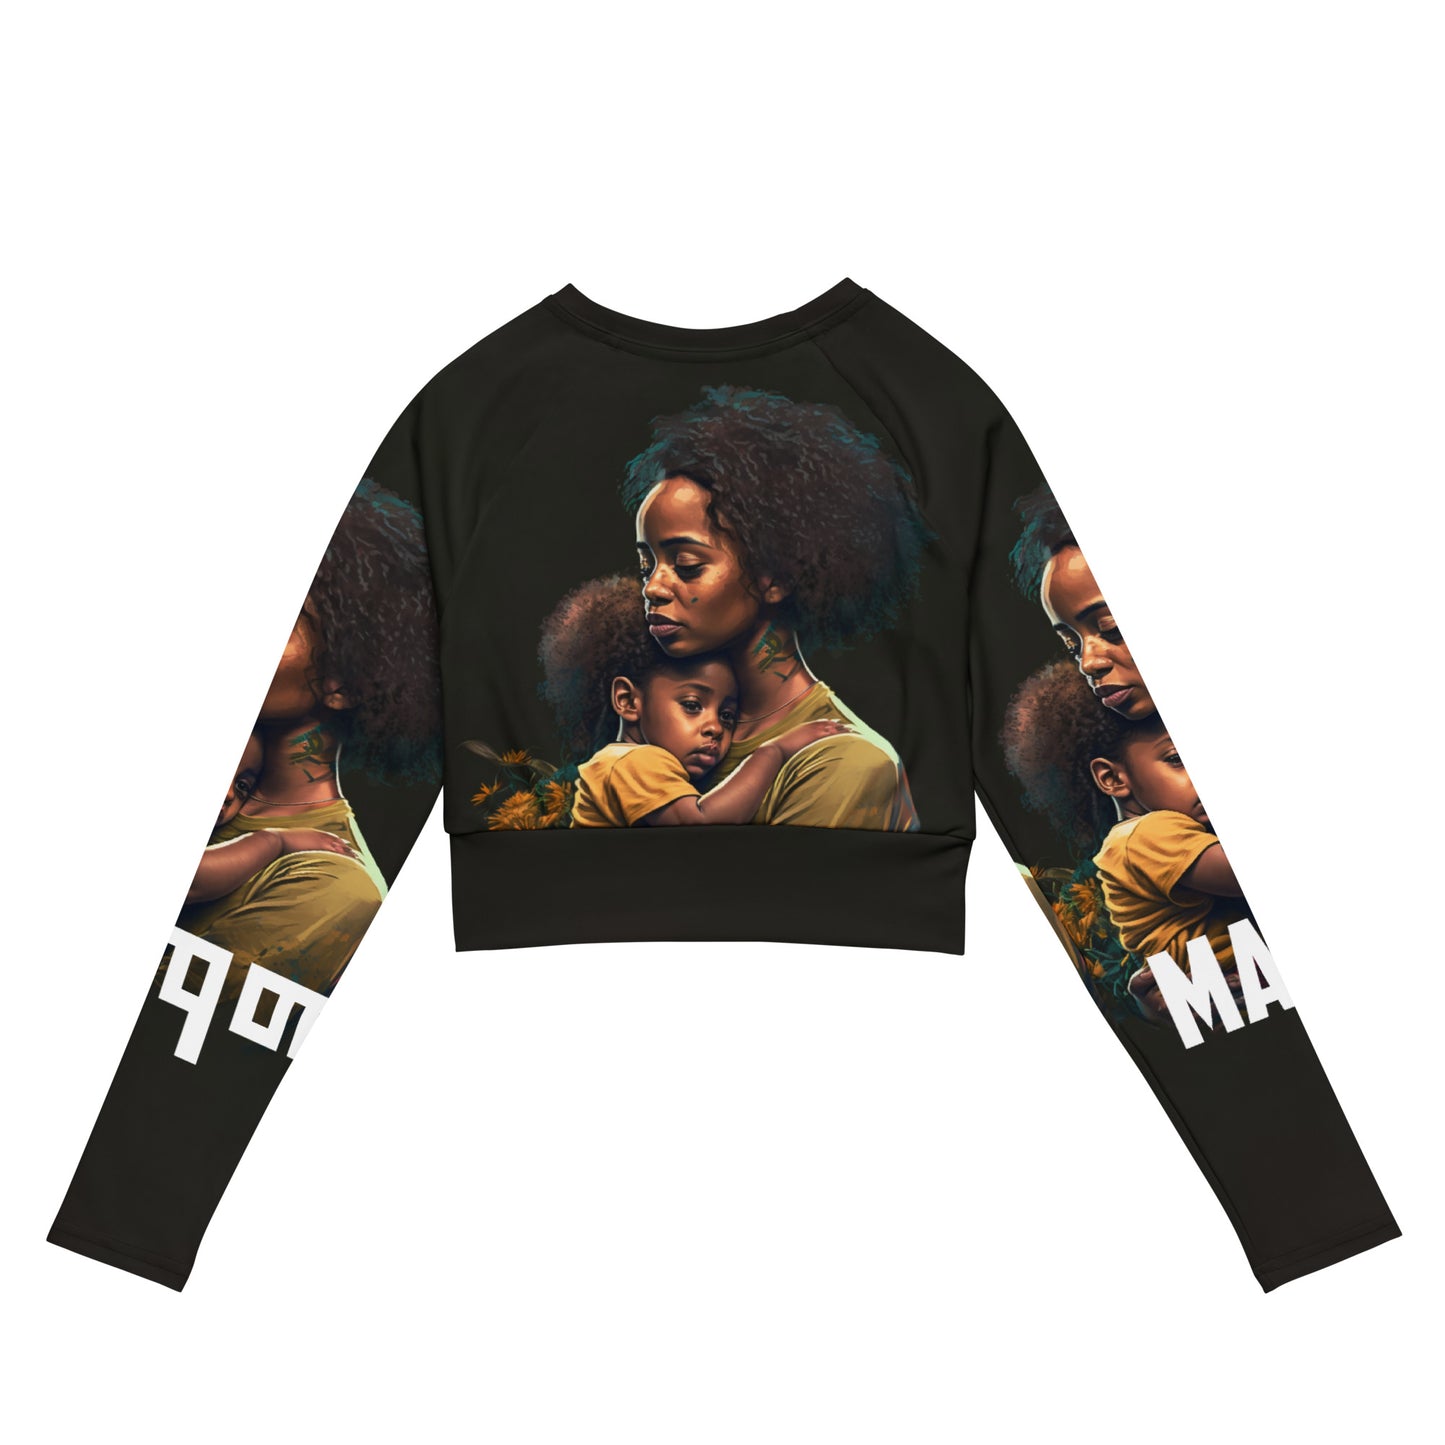 Mama እማማ  Recycled long-sleeve crop top